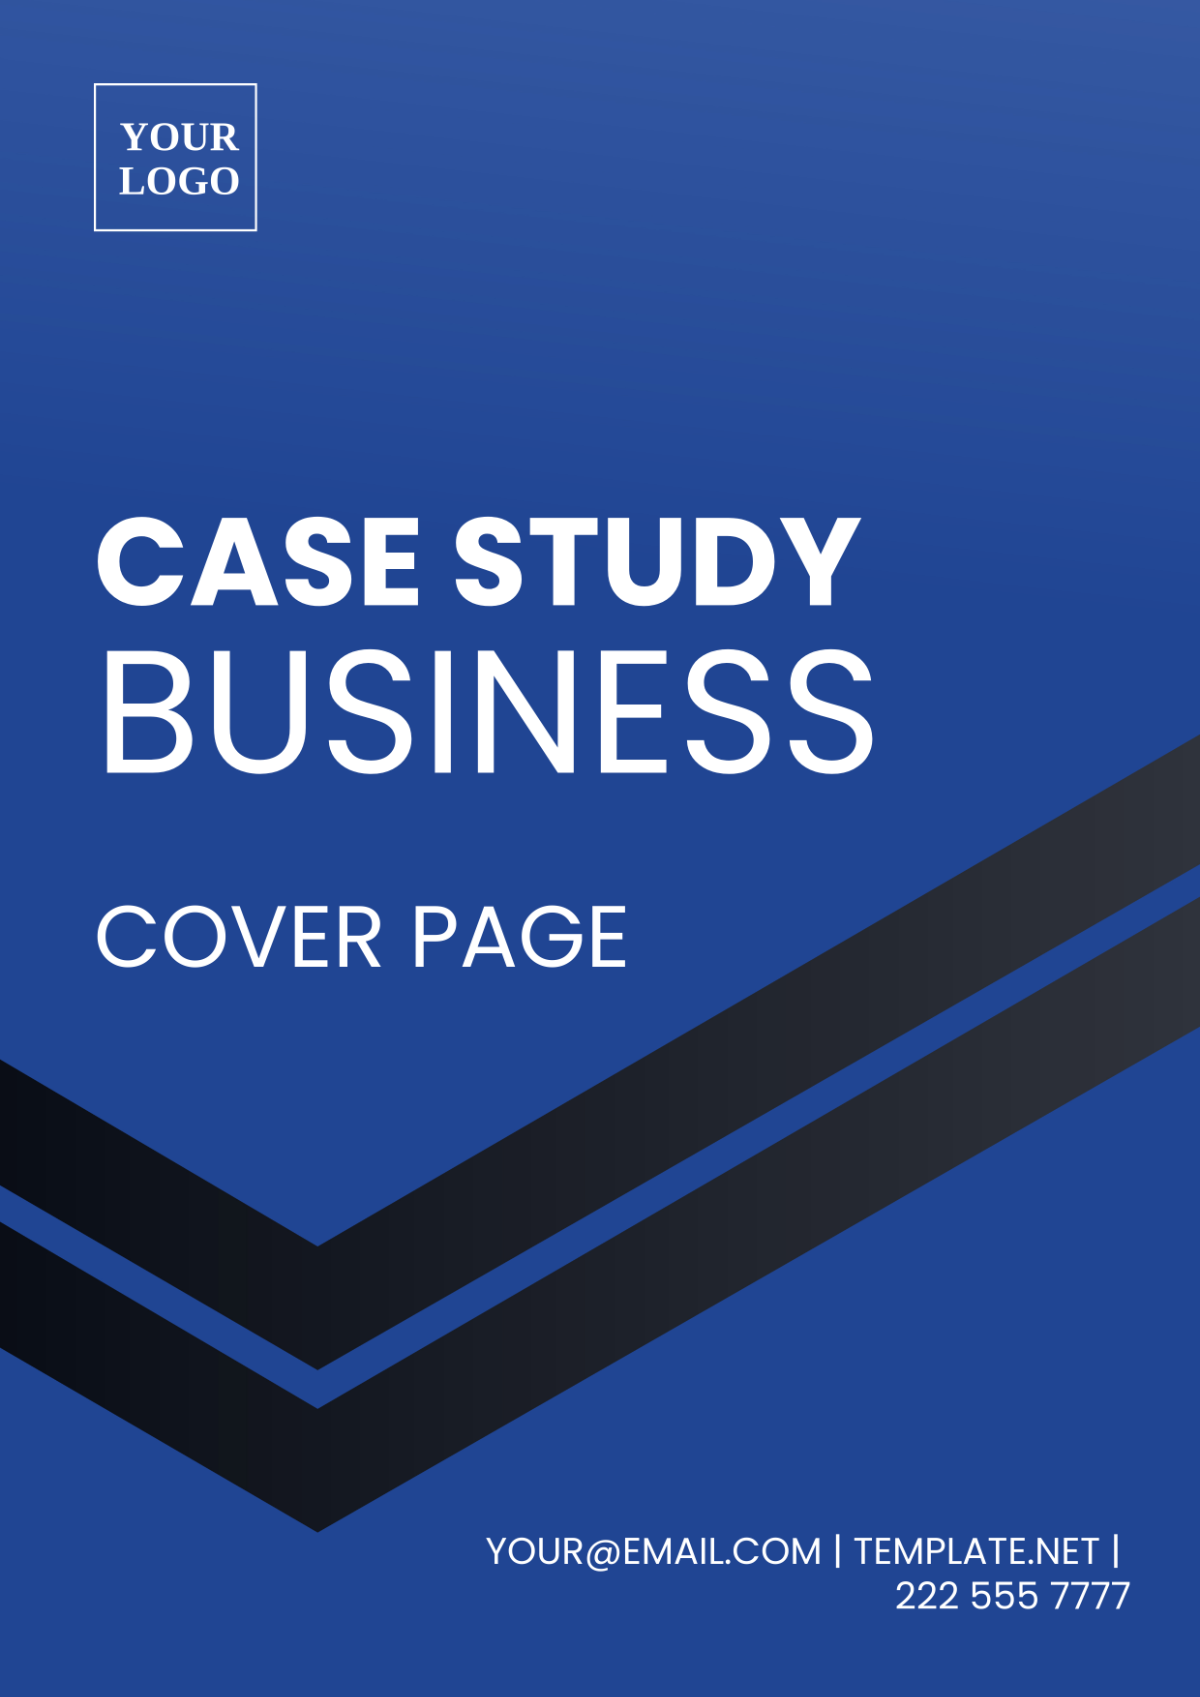 Case Study Business Cover Page Template